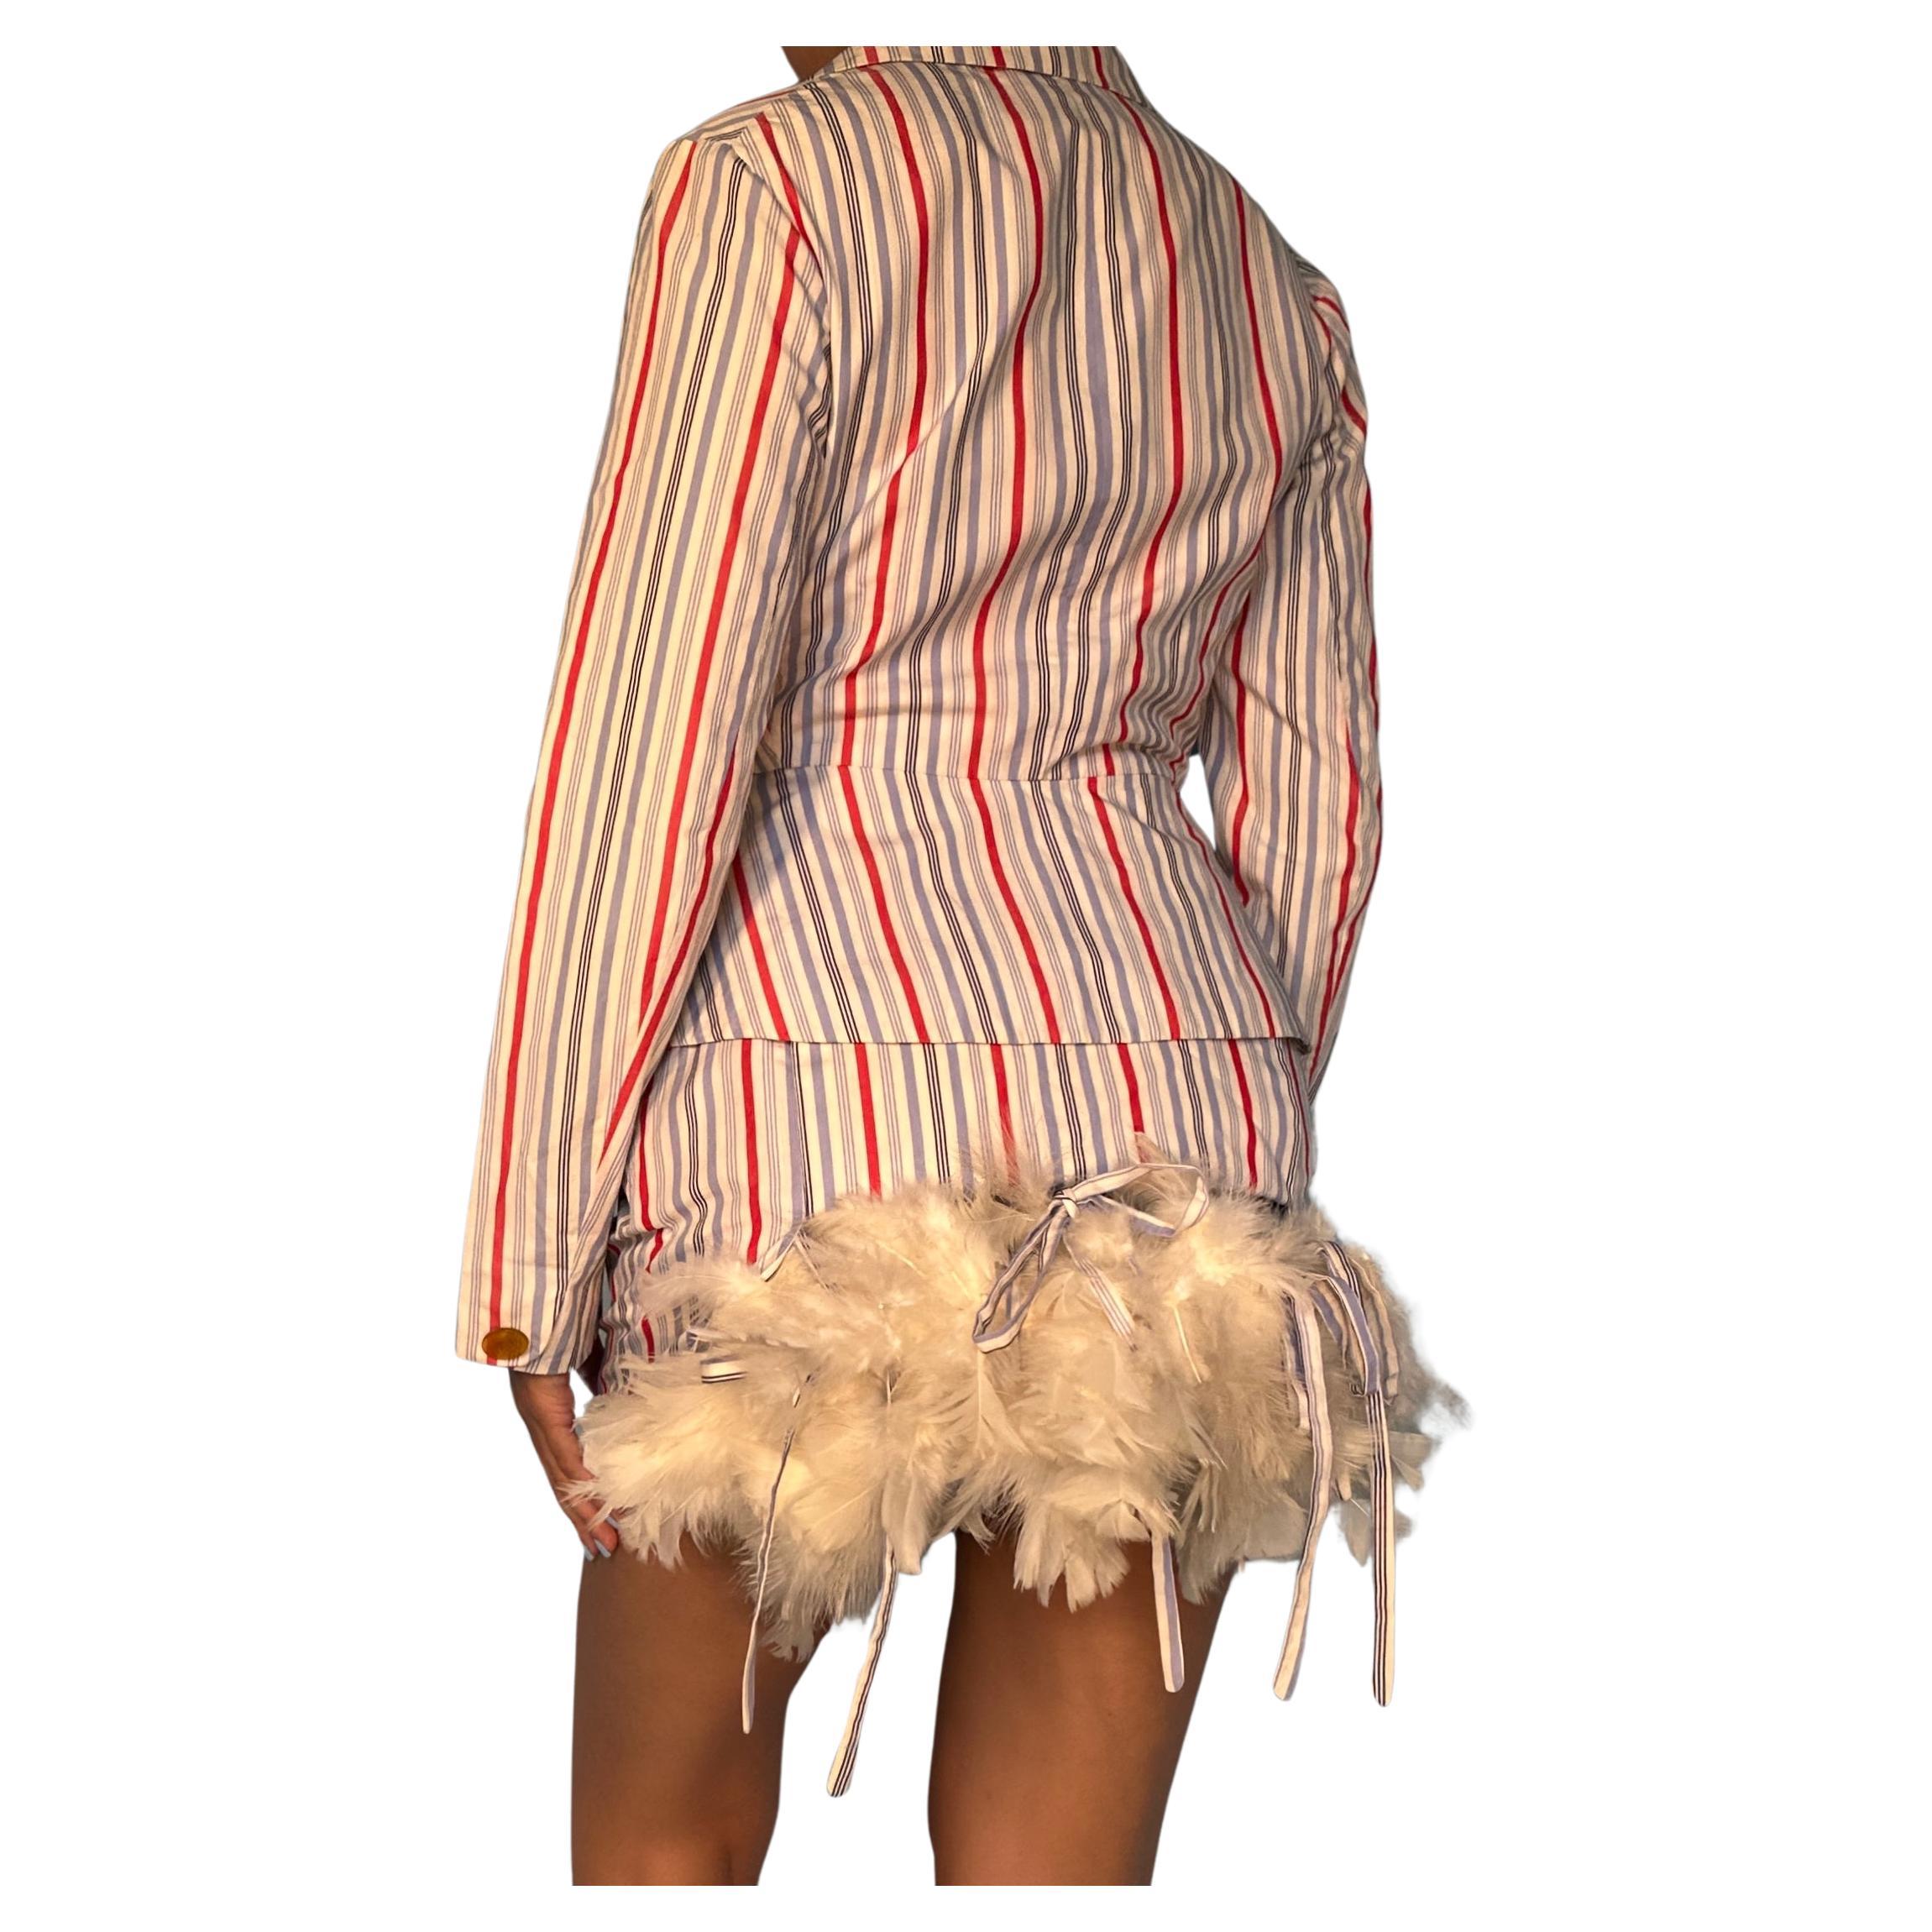 Vintage Vivienne Westwood

Spring 1994 “Cafe Society” collection - seen on the runway

Red, white and blue striped skirt & jacket suit set

Feather bustle detail on skirt 

Detachable feather boa, held in with tie ups 

Fitted blazer jacket 

High